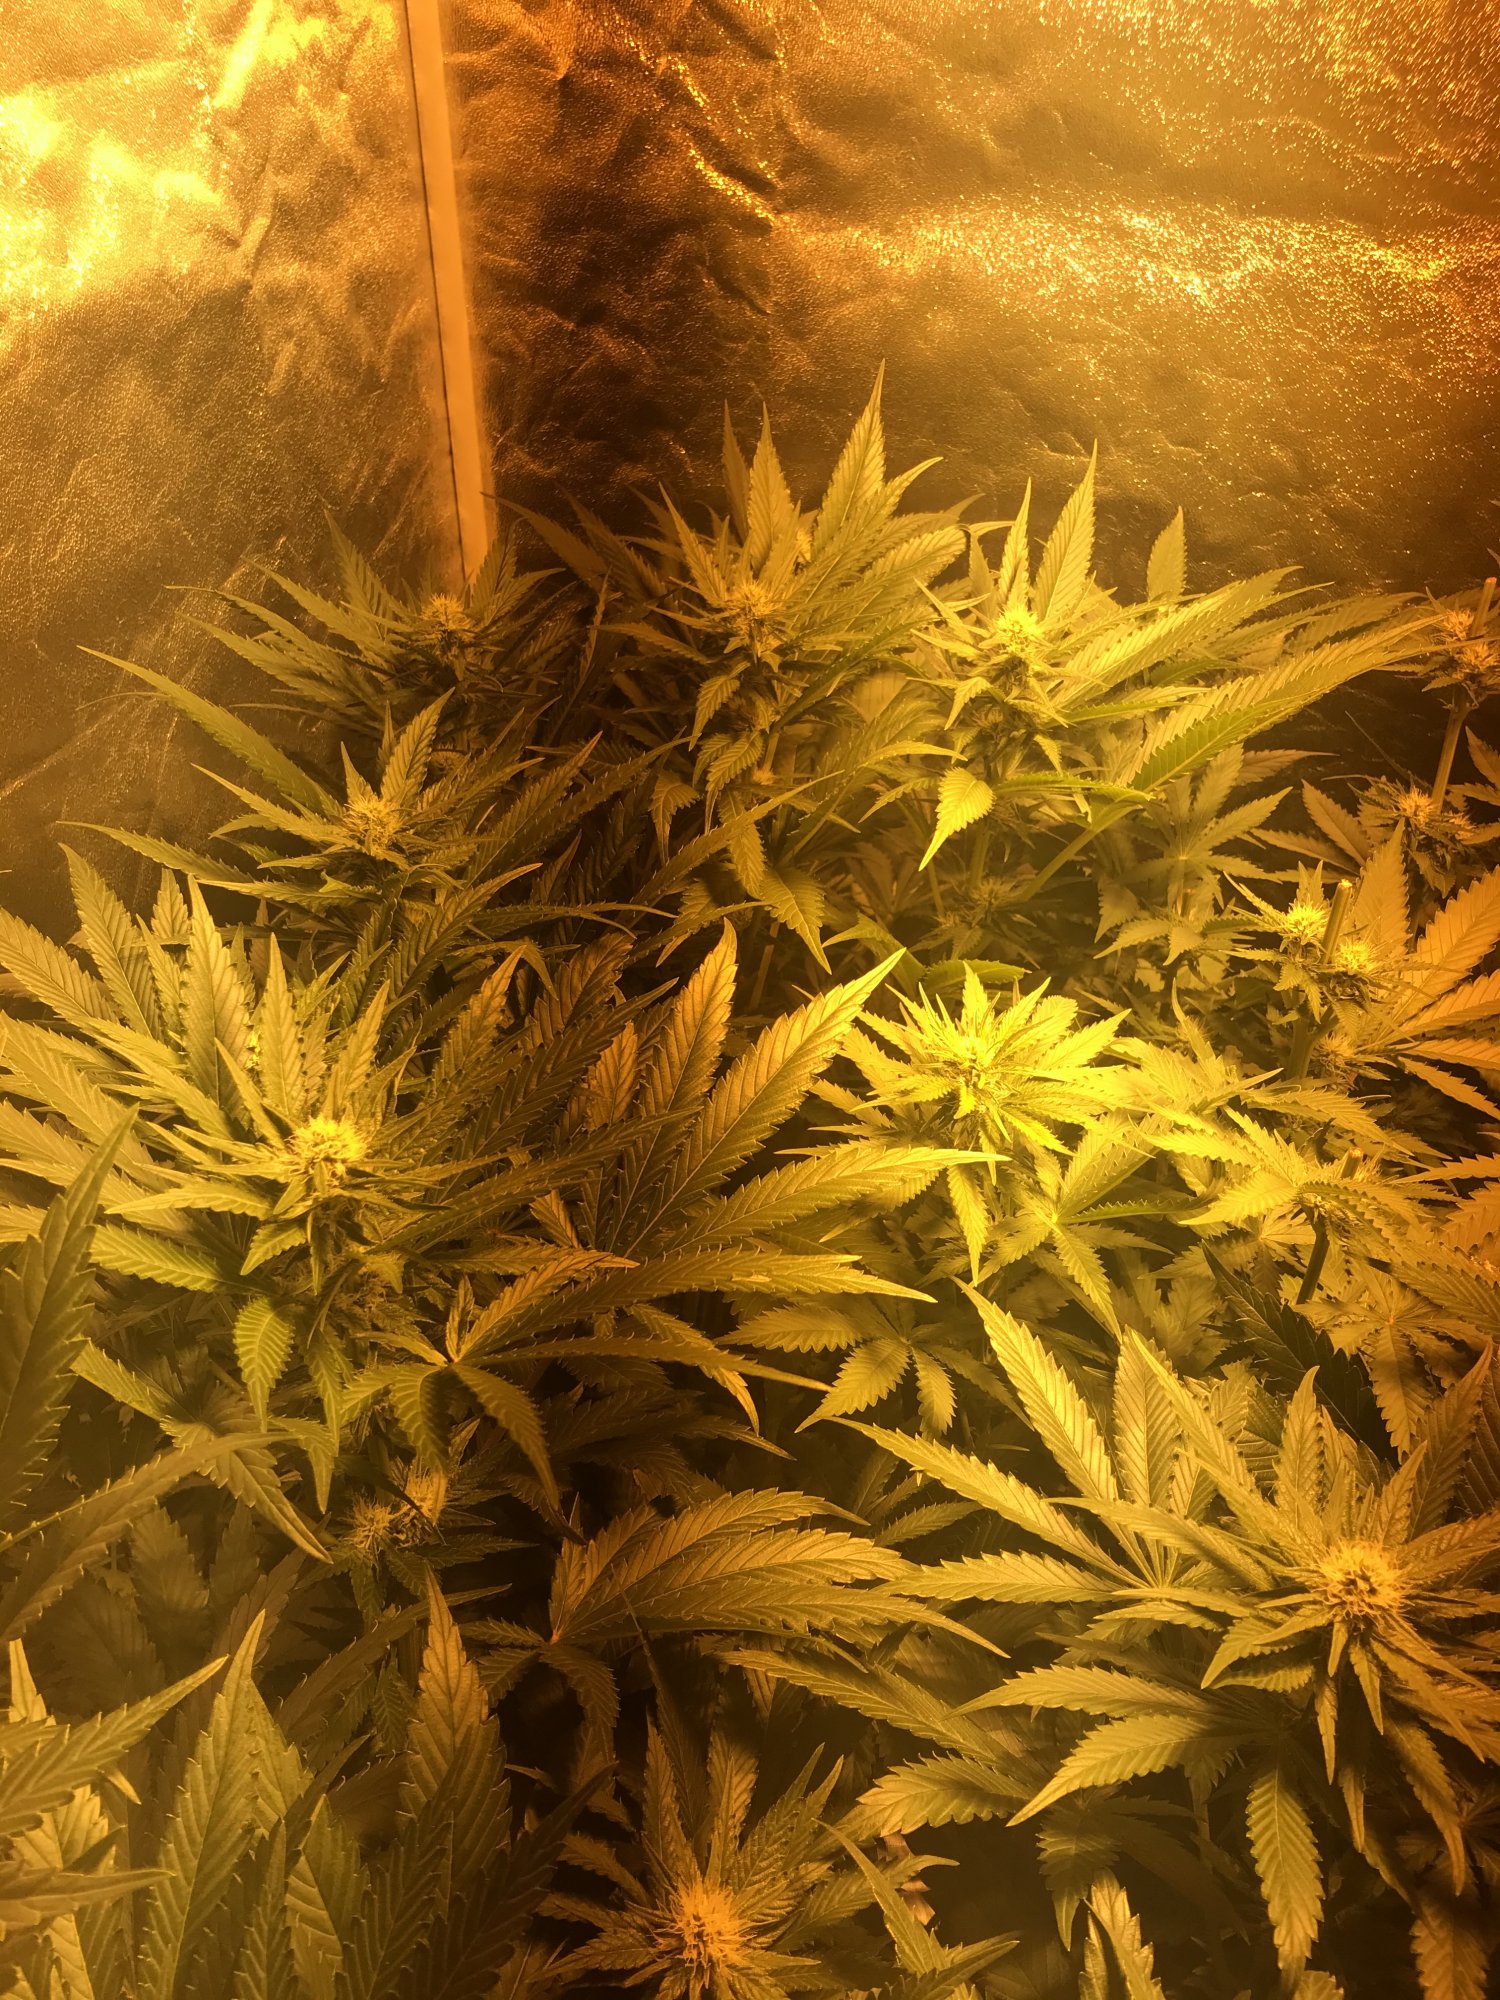 Please have a look at my plants 3 weeks into flower today 13